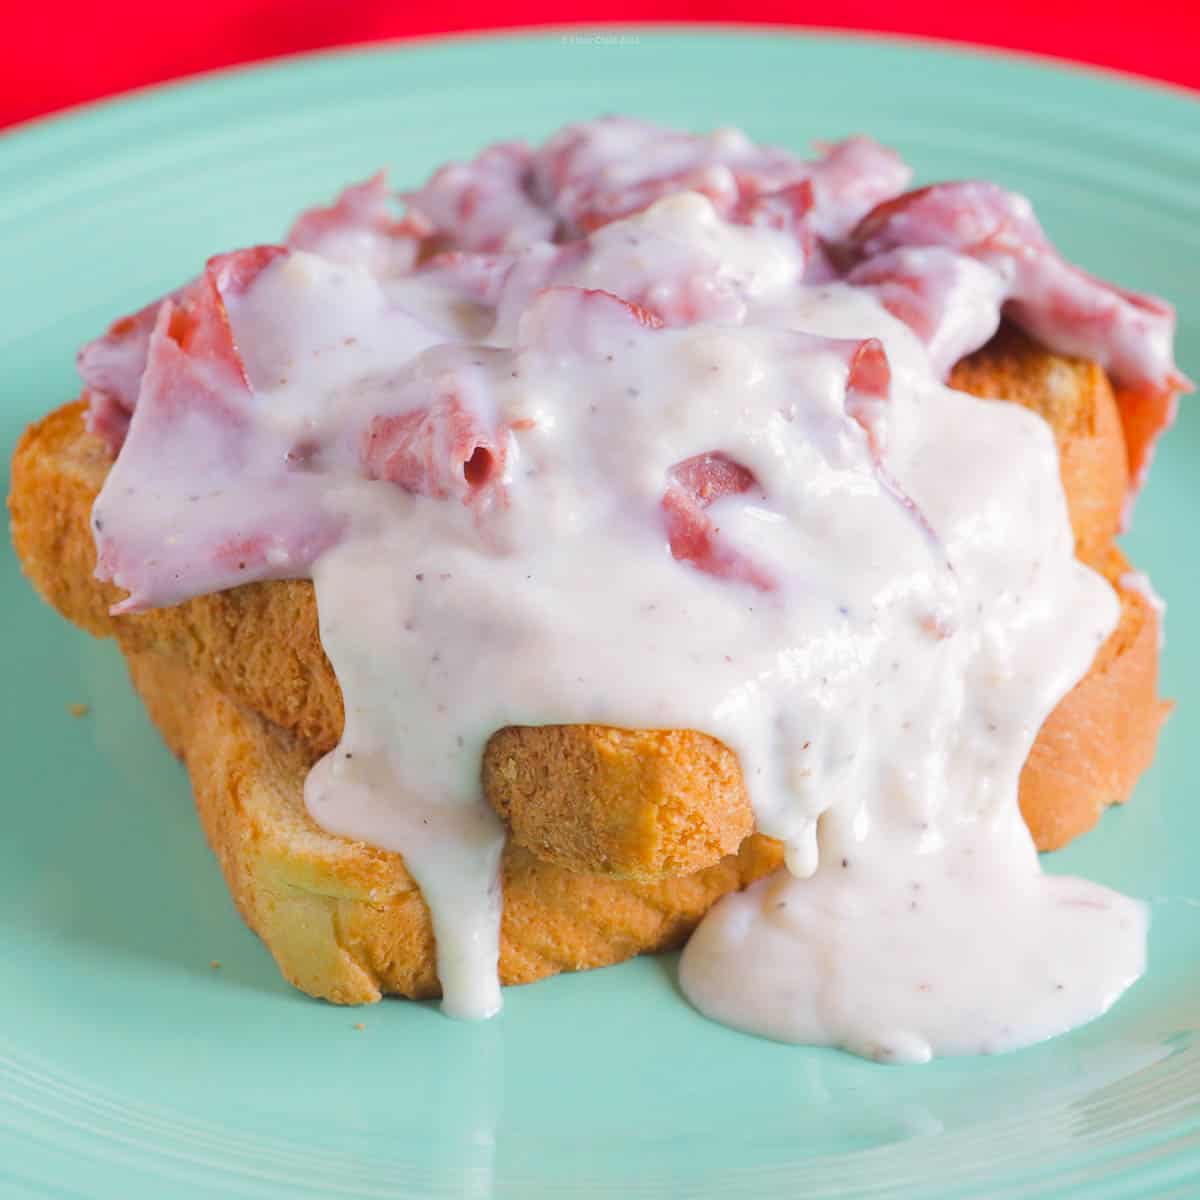 Creamed chipped beef poured over two slices of toast.